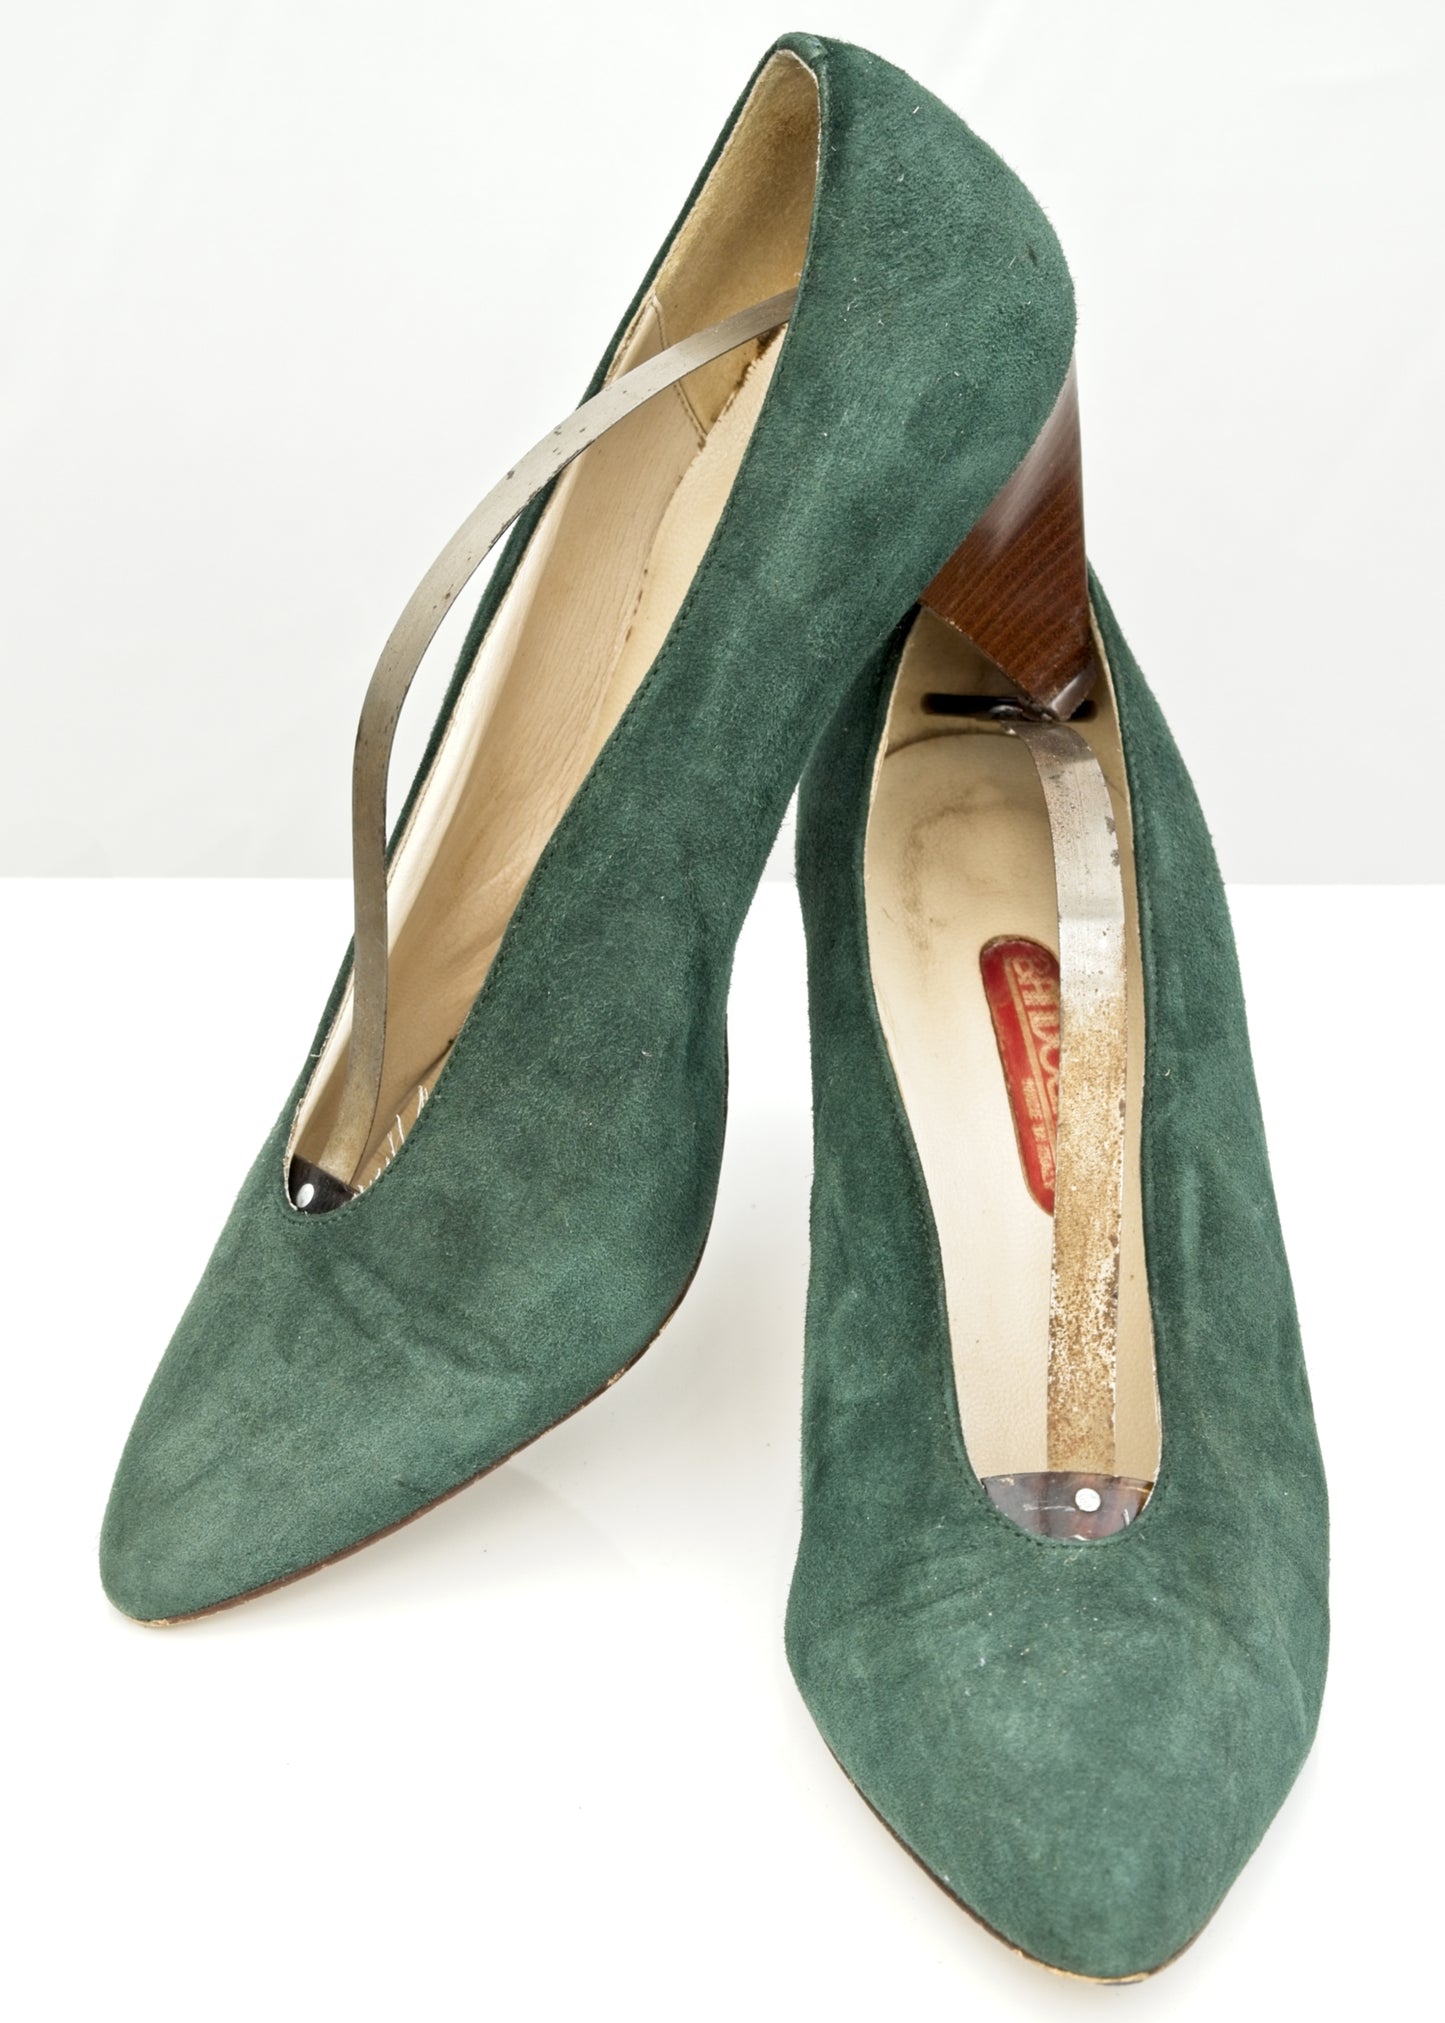 vintage 1980s green suede court shoes with 2.5 inch heel, made by bandolini in italy